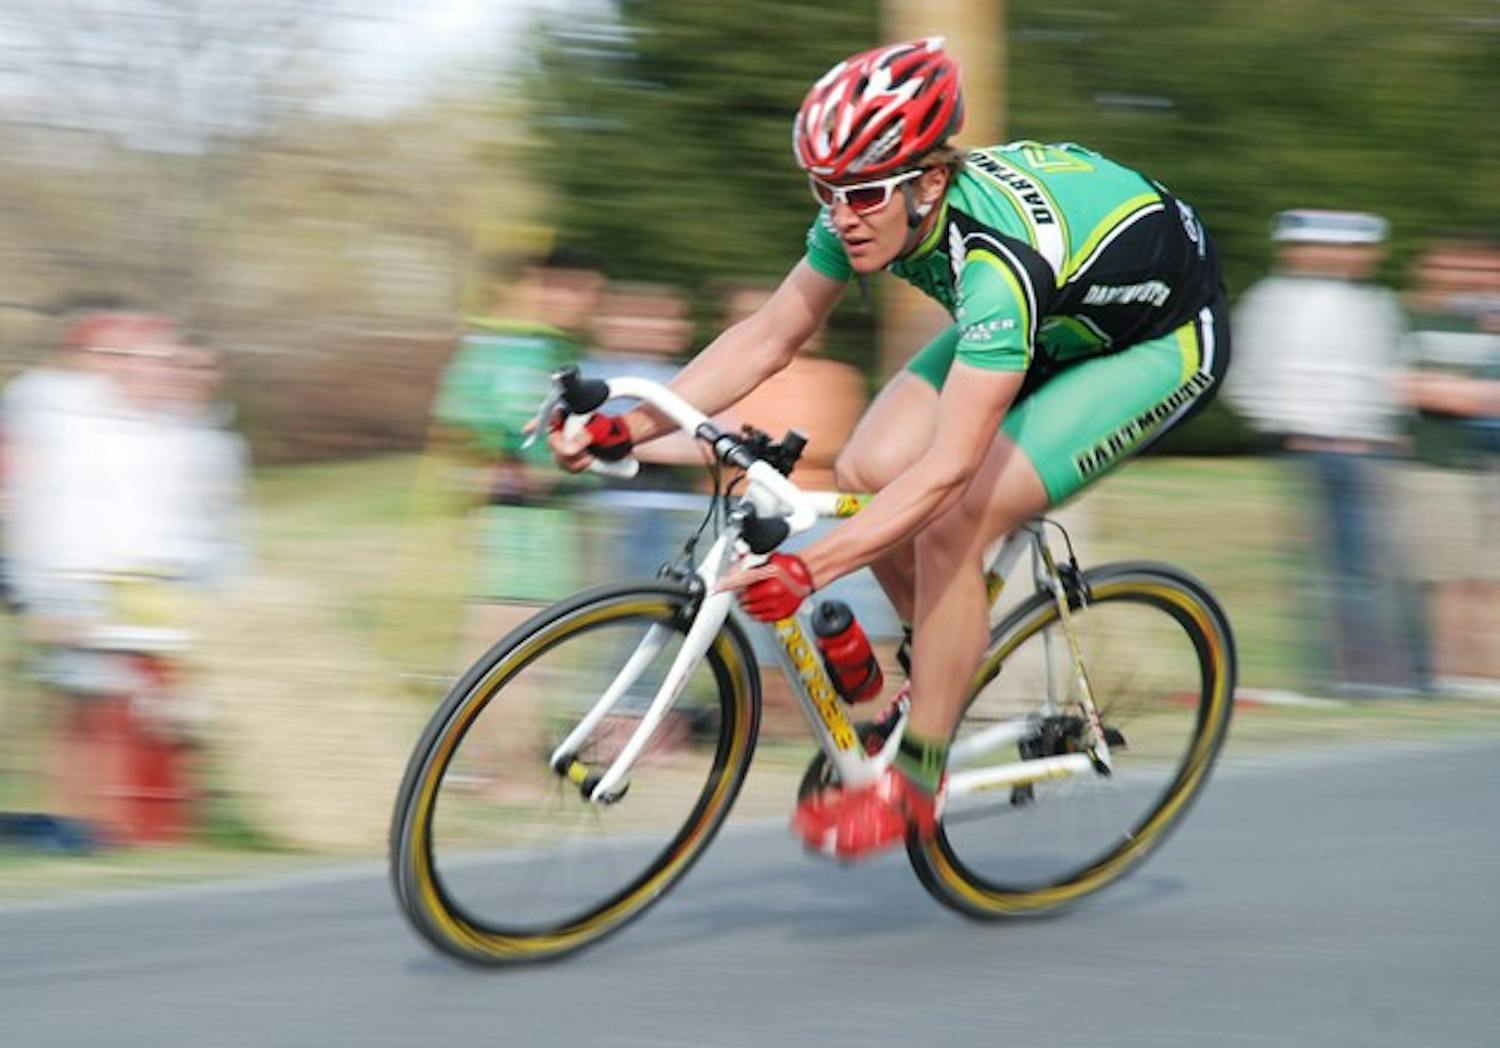 Dartmouth's cycling team bested a field of 400 riders representing over 40 teams and claimed the Eastern Collegiate Cycling Conference Championship title. The races were held in Hanover last weekend.